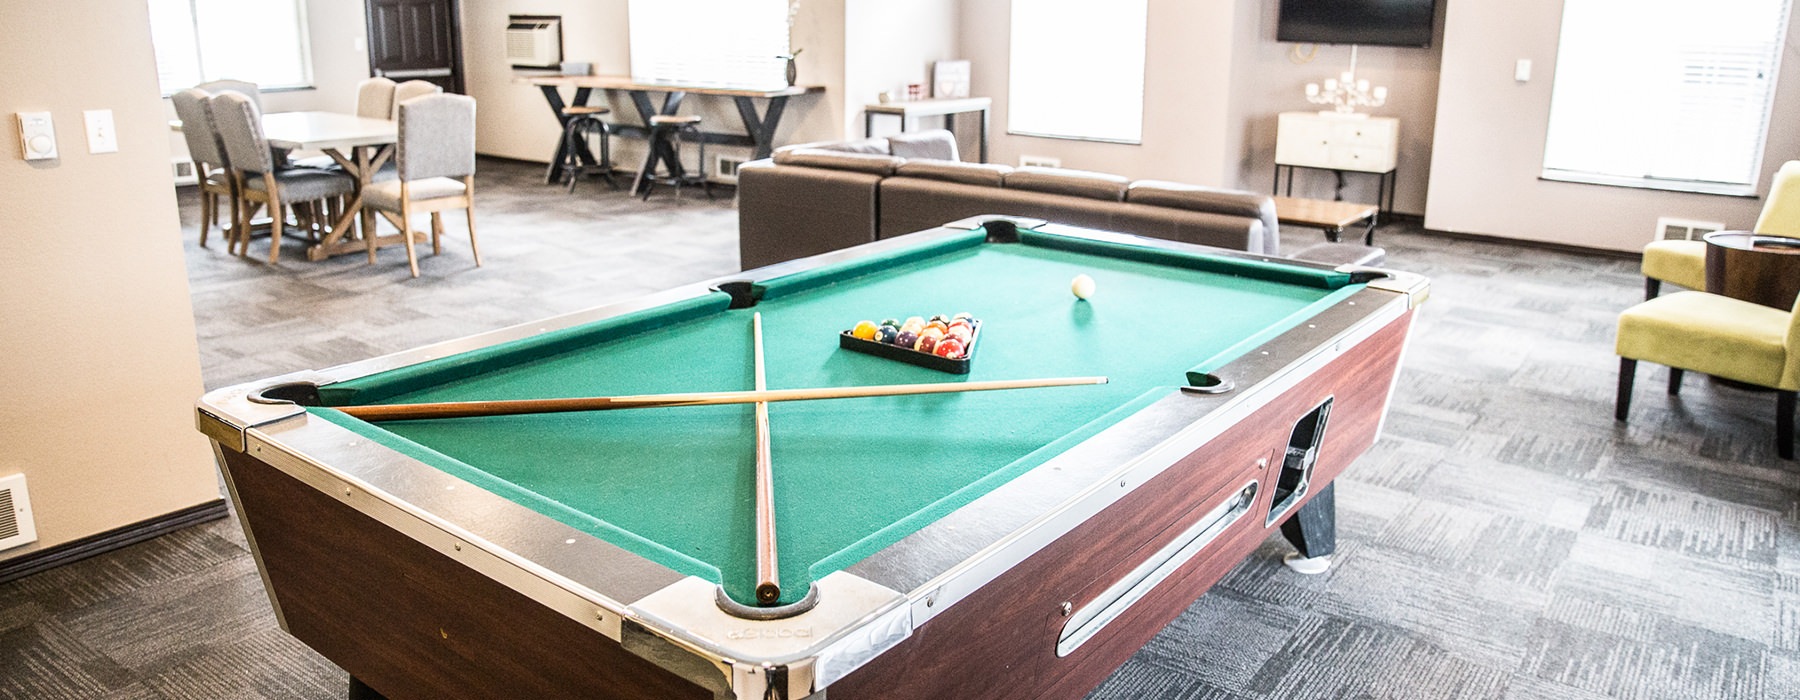 game room with billiards table and couch